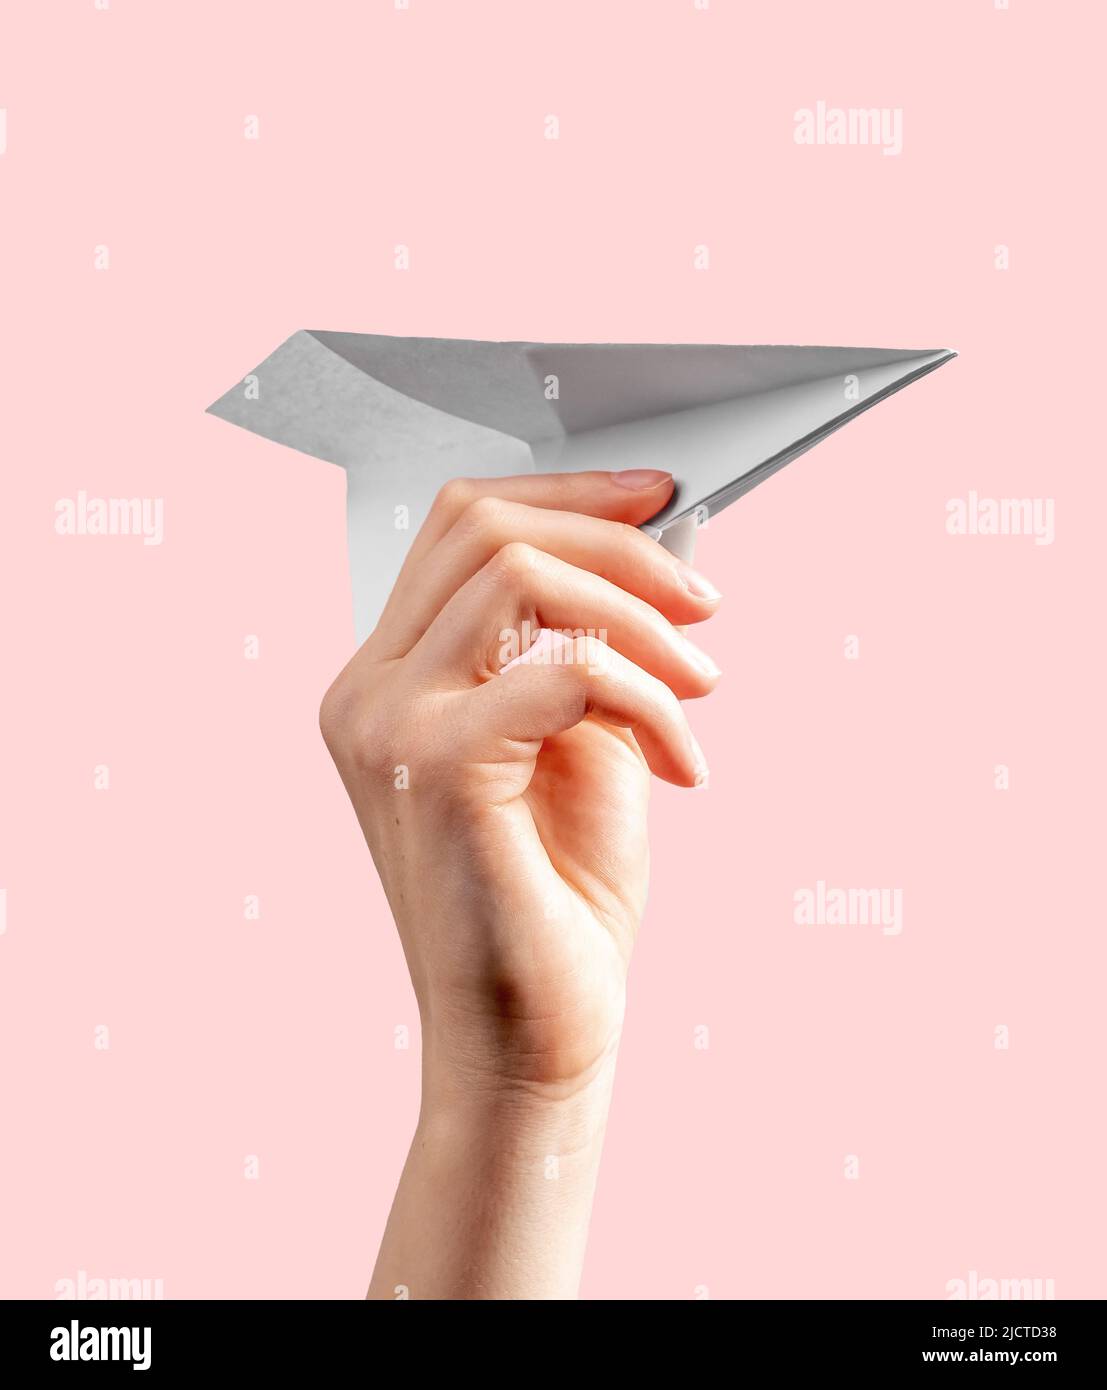 Woman hand throwing origami plane on pink background. Symbol of childhood, freedom, imagination, creativity. Paper folding art. High quality photo Stock Photo